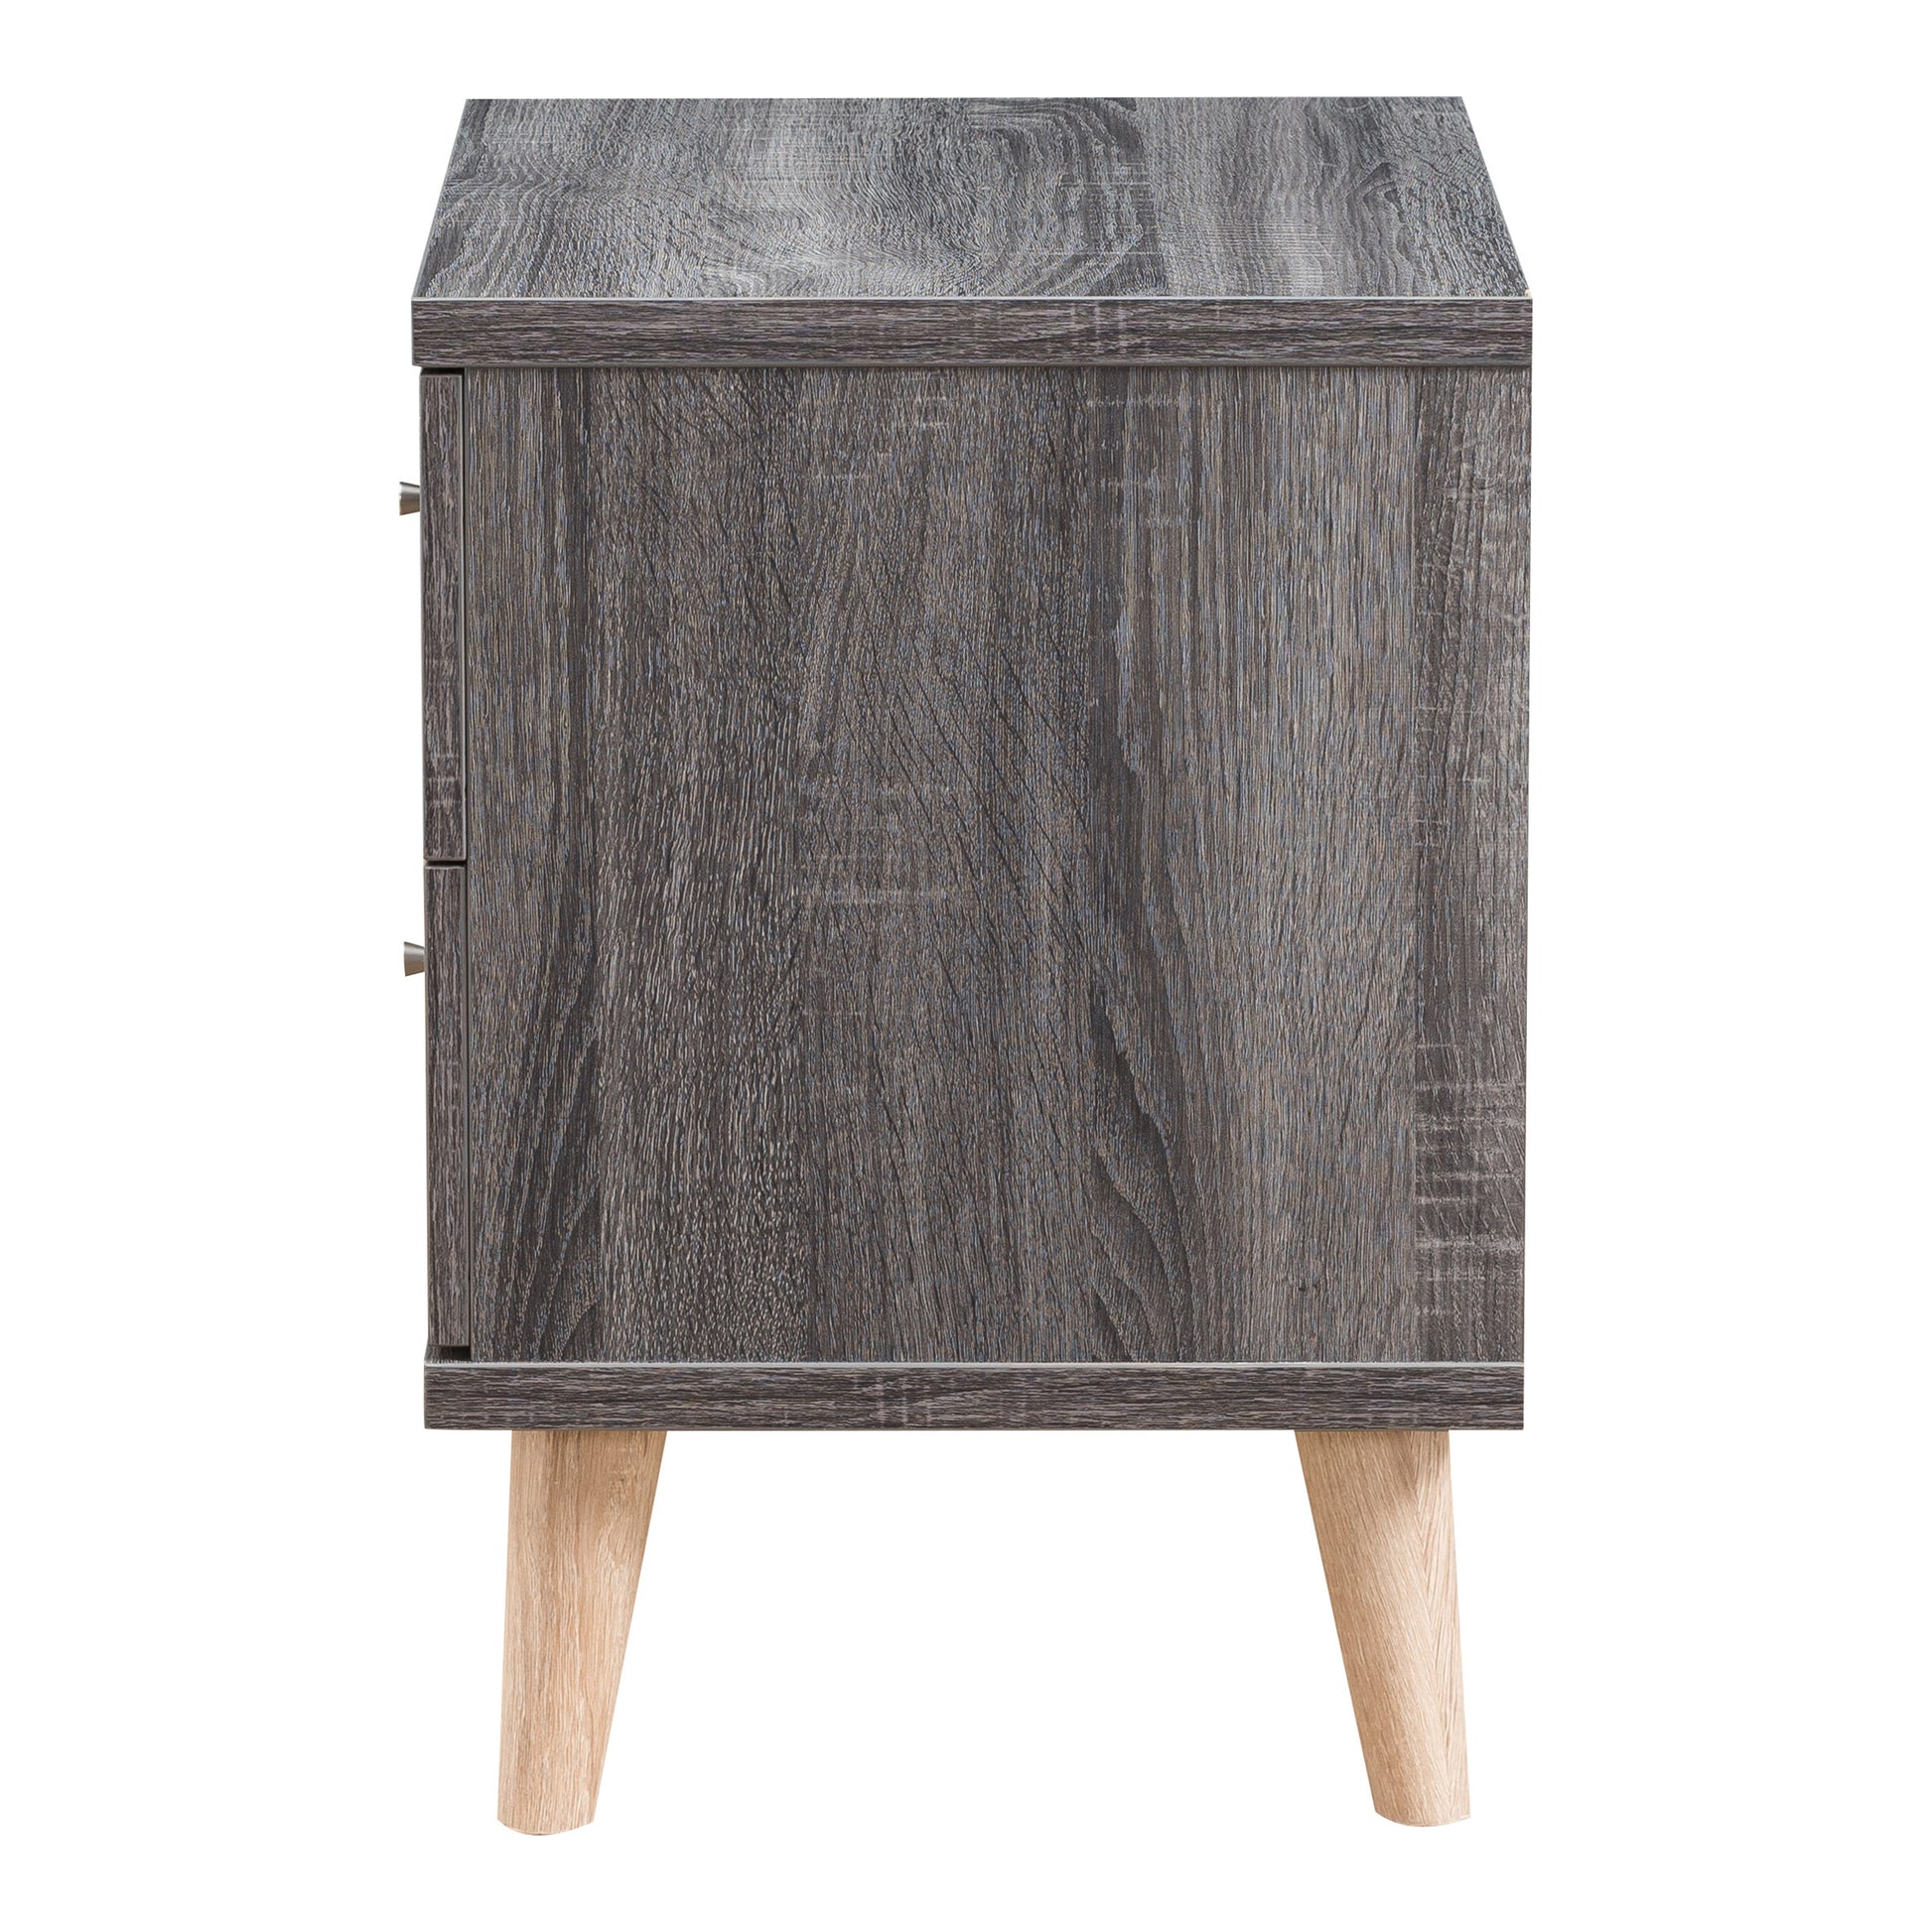 Front-facing side view of a mid-century modern distressed gray two-drawer nightstand on a white background